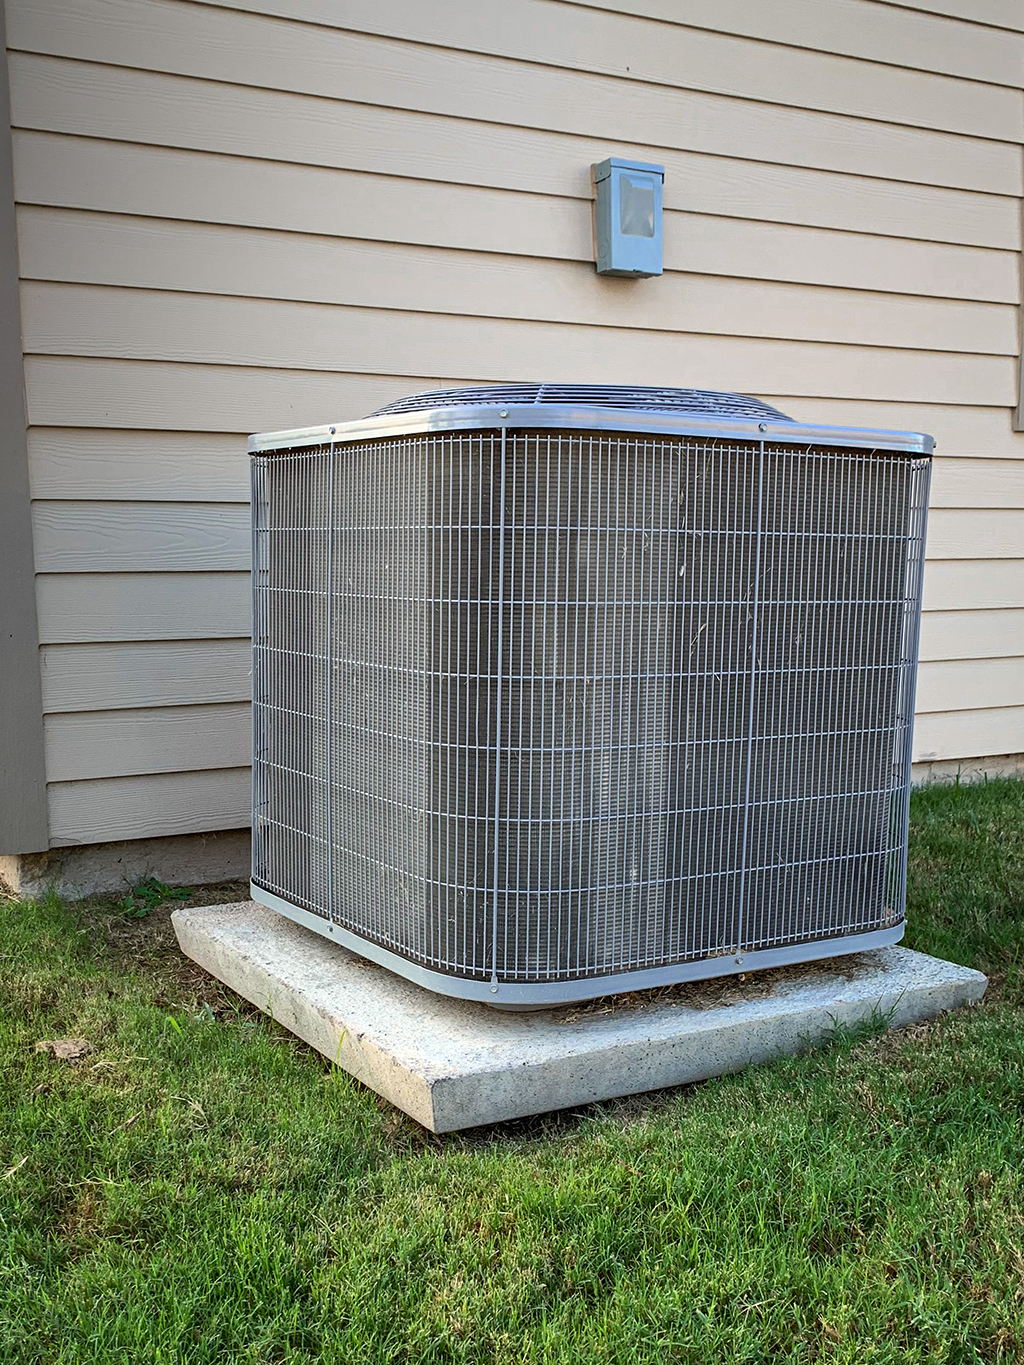 Reasons To Call A Heating And AC Repair Service | New Orleans, LA